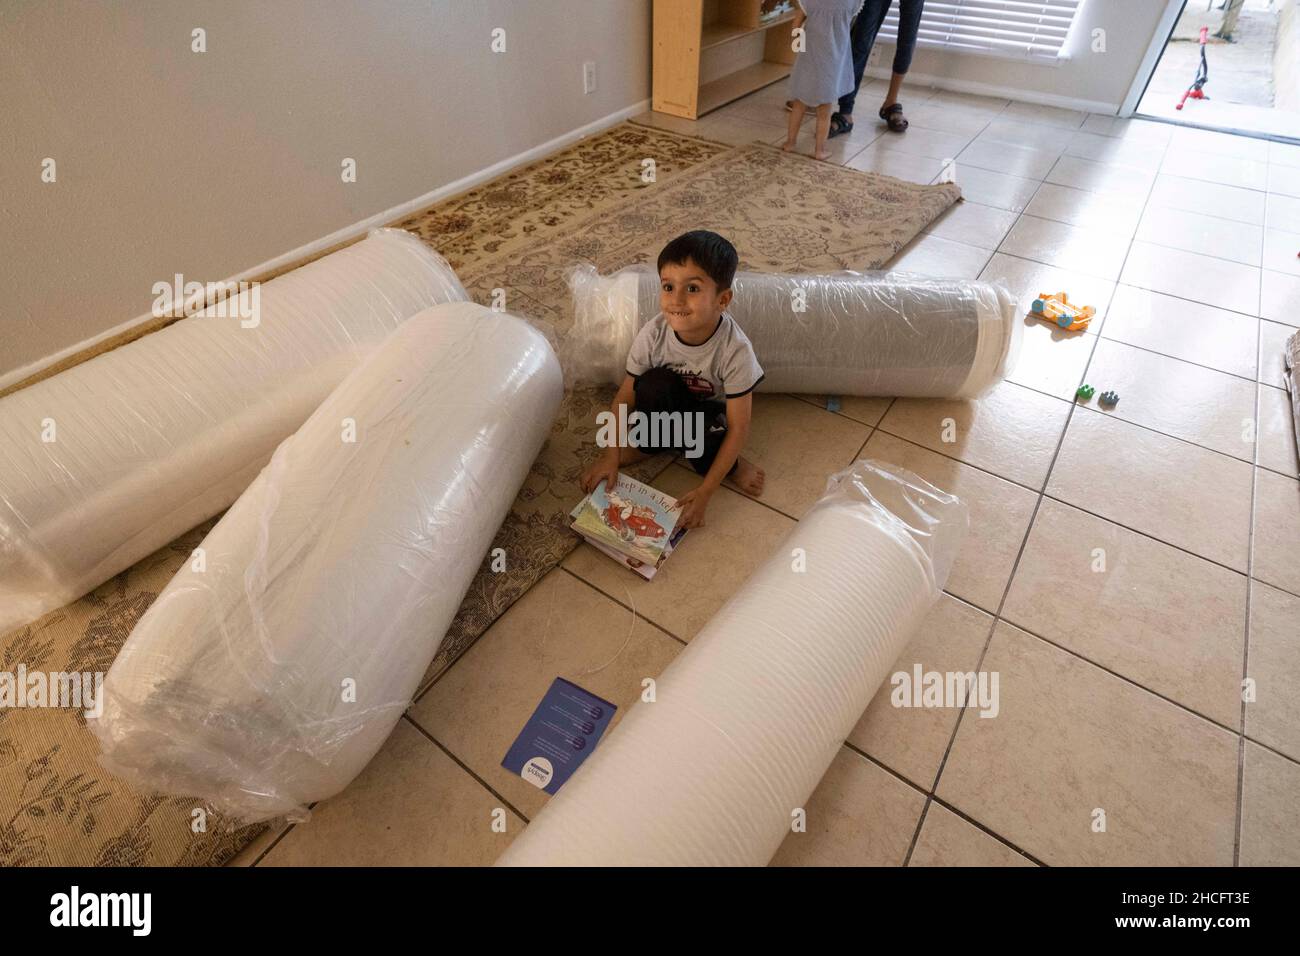 Austin Texas USA, October 2021: Afghan childposes with rolled-up new mattresses in his family's new apartment in a complex near downtown. Refugees fleeing turmoil in Afghanistan continue to be resettled in Texas with many single men and large families with children moving into apartments across Austin. Faith-based and other non-profit groups have stepped up to help coordinate efforts in furnishing homes for hundreds of refugees. ©Bob Daemmrich Stock Photo